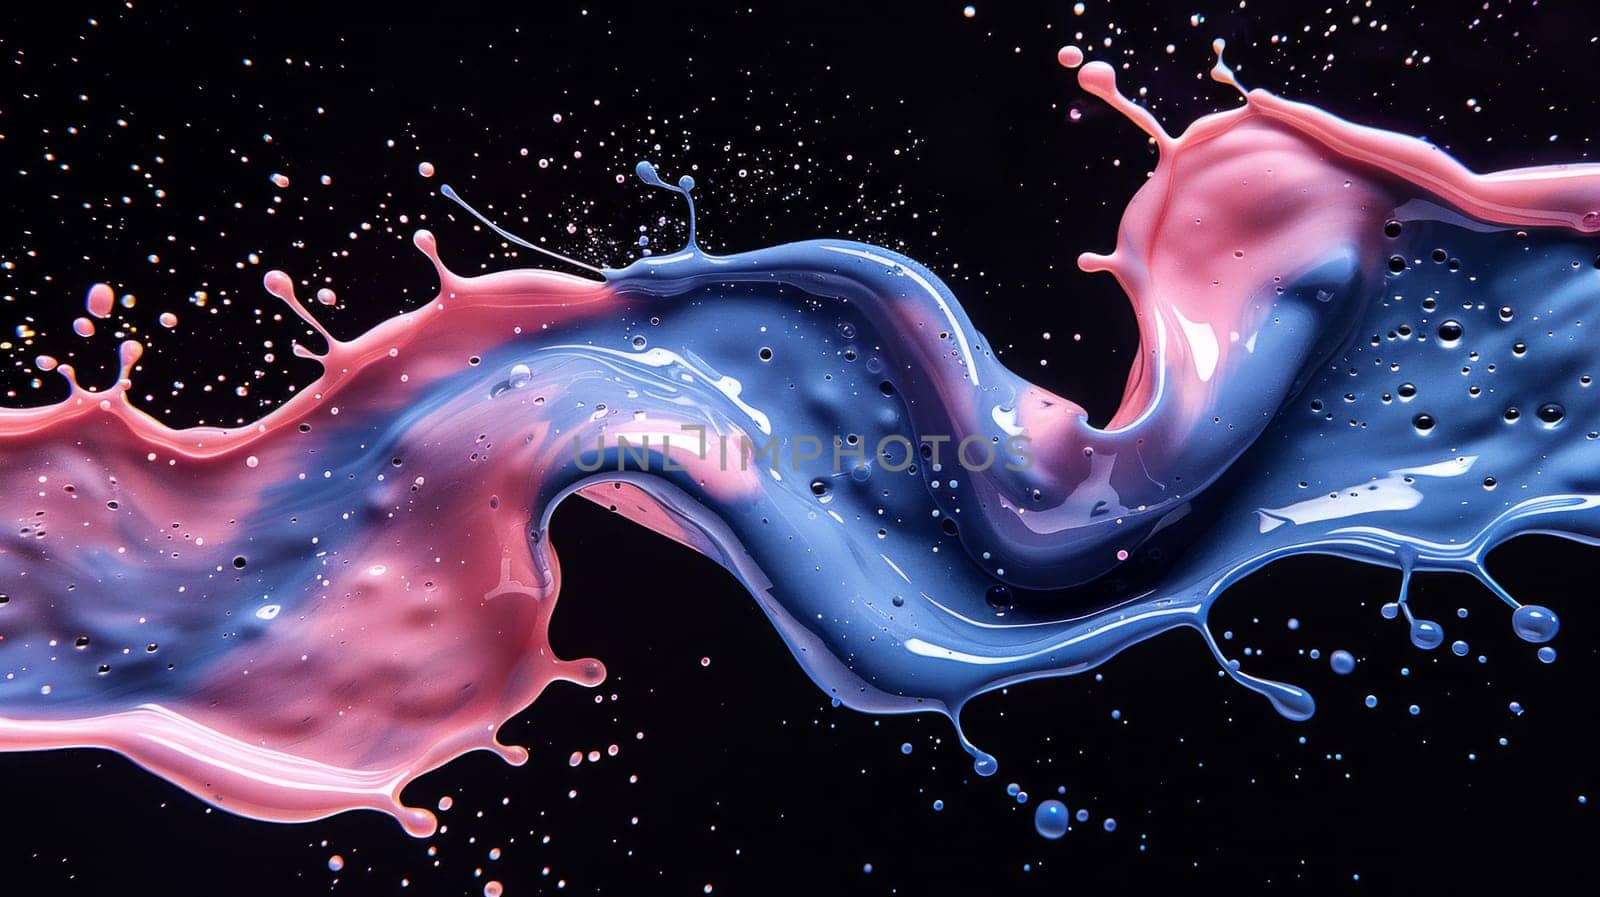 A mesmerizing dance of blue and pink liquids swirl elegantly against a black backdrop creating a stunning abstract display of color and movement by but_photo